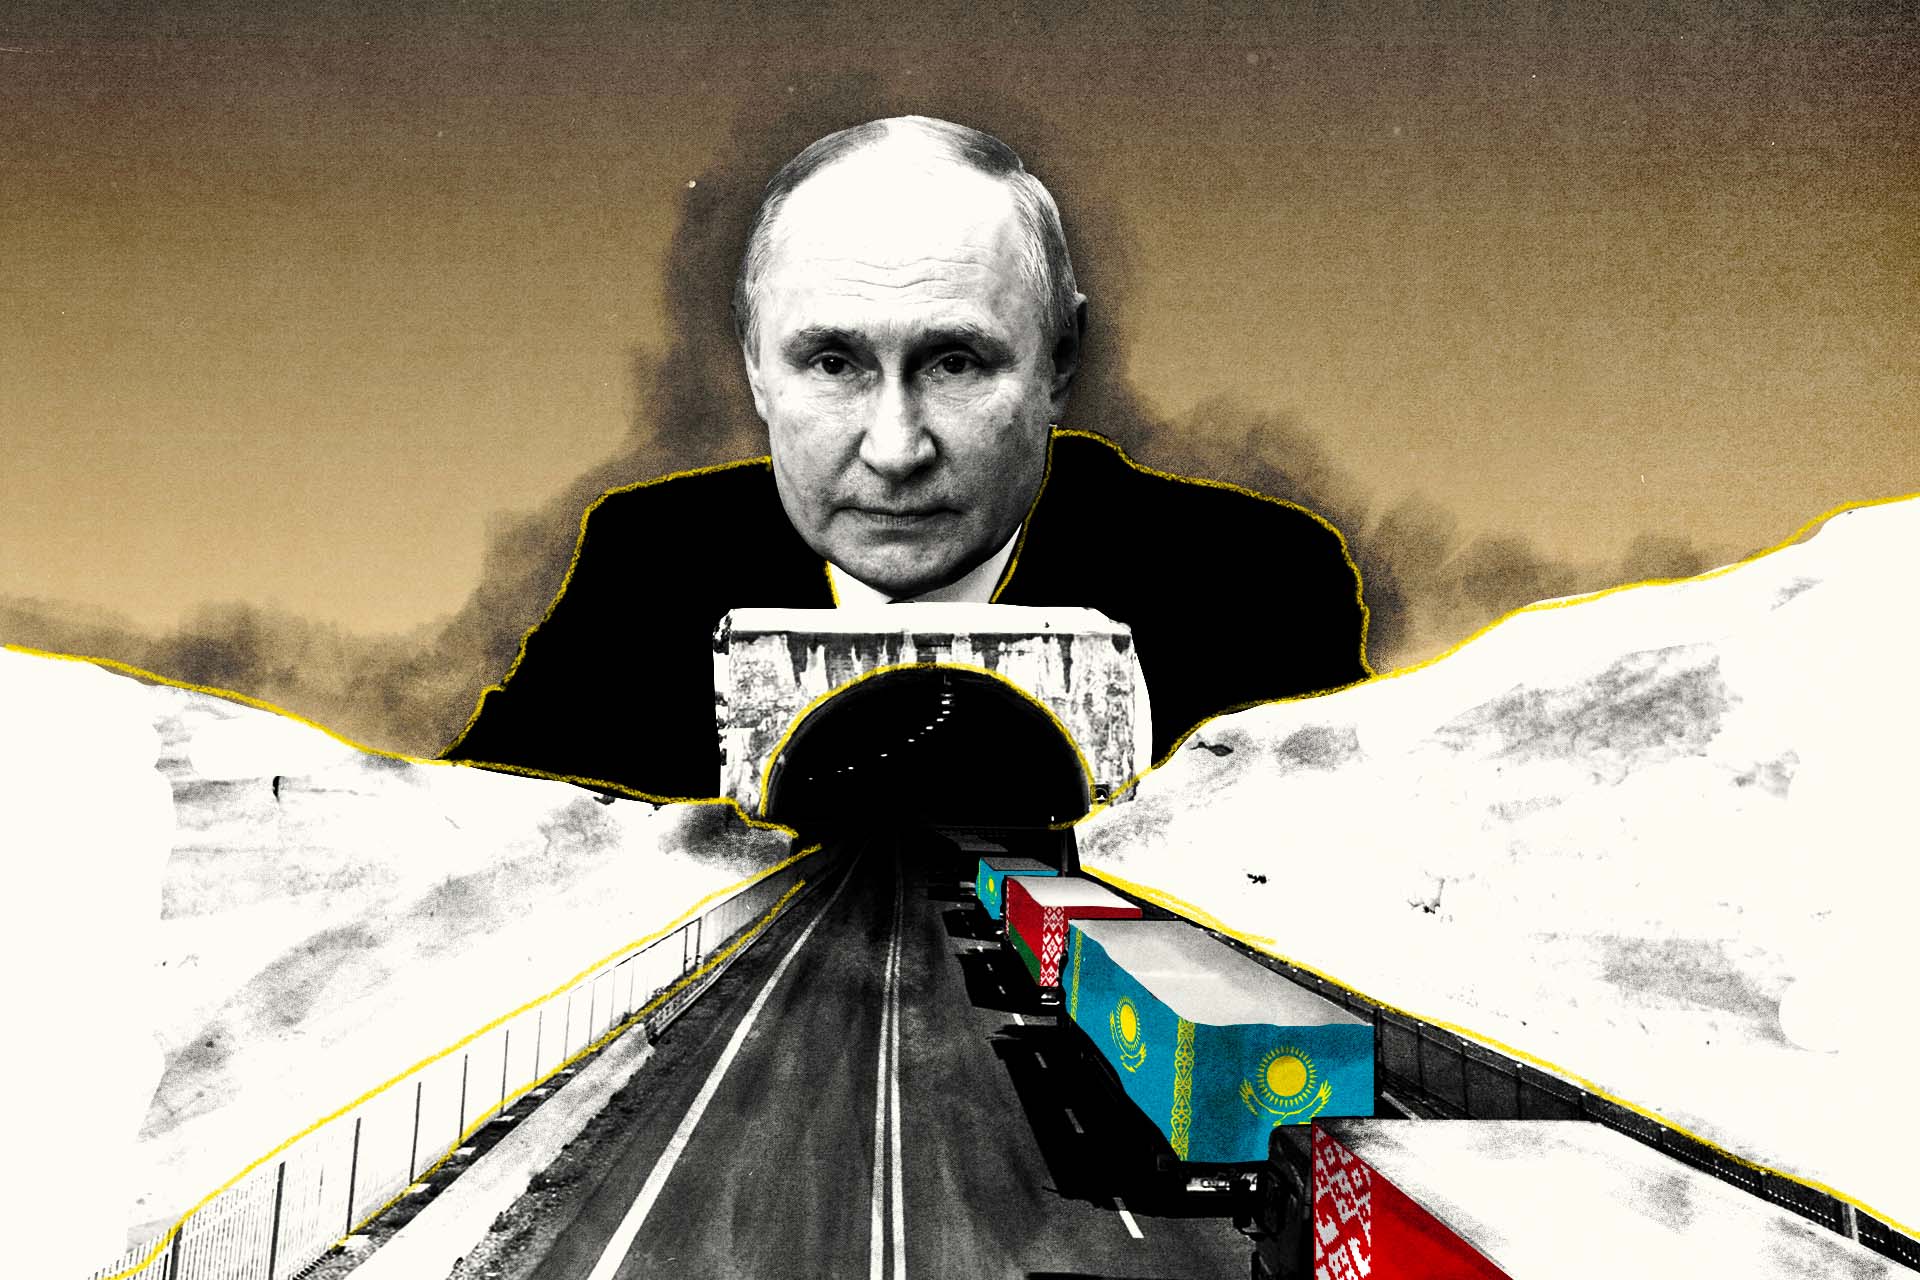 In “False Transit’ Loophole, Russia’s War Machine Is Supplied Through Kazakh Companies and Belarusian Warehouses